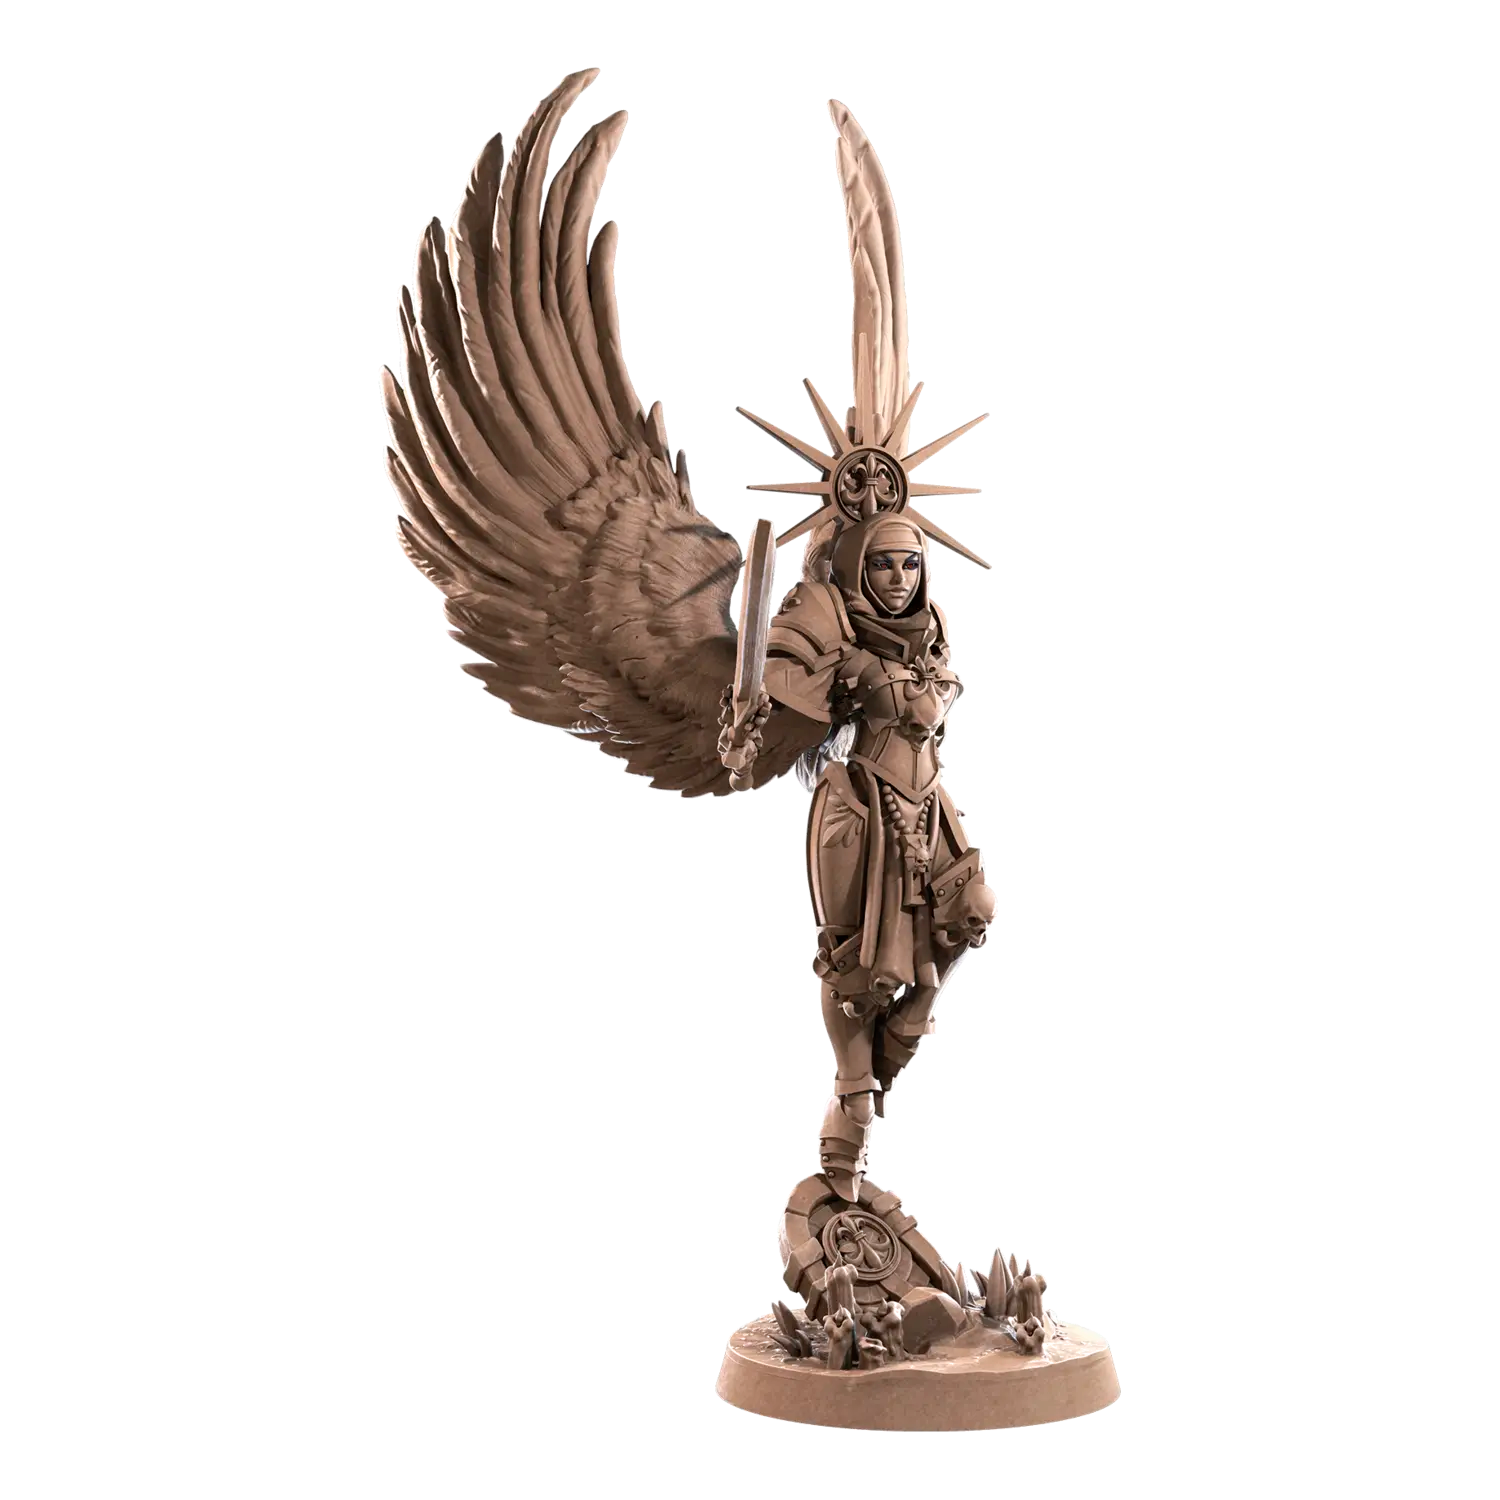 DnD Angel - Battle Sisters - Fighter - Human - Miniature - Paladin Evangeline 02 Angel - Battle Sisters - Fighter - Human - Miniature - Paladin sold by DoubleHitShop